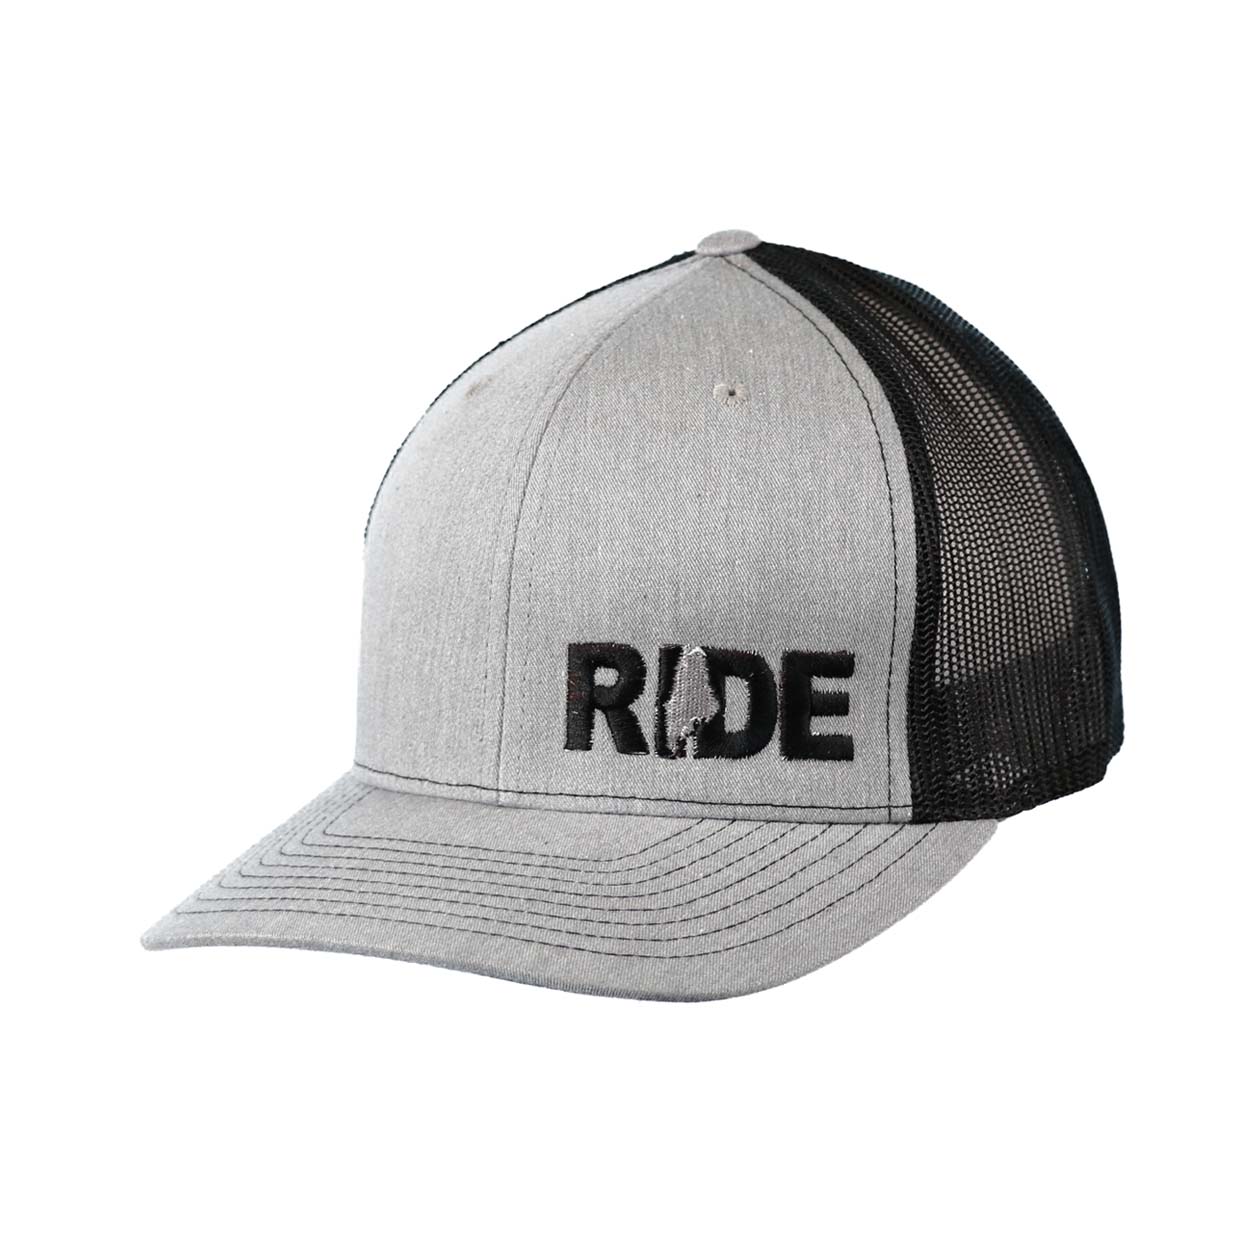 Ride Maine Night Out Pro Embroidered Snapback Trucker Hat Heather Gray/Black